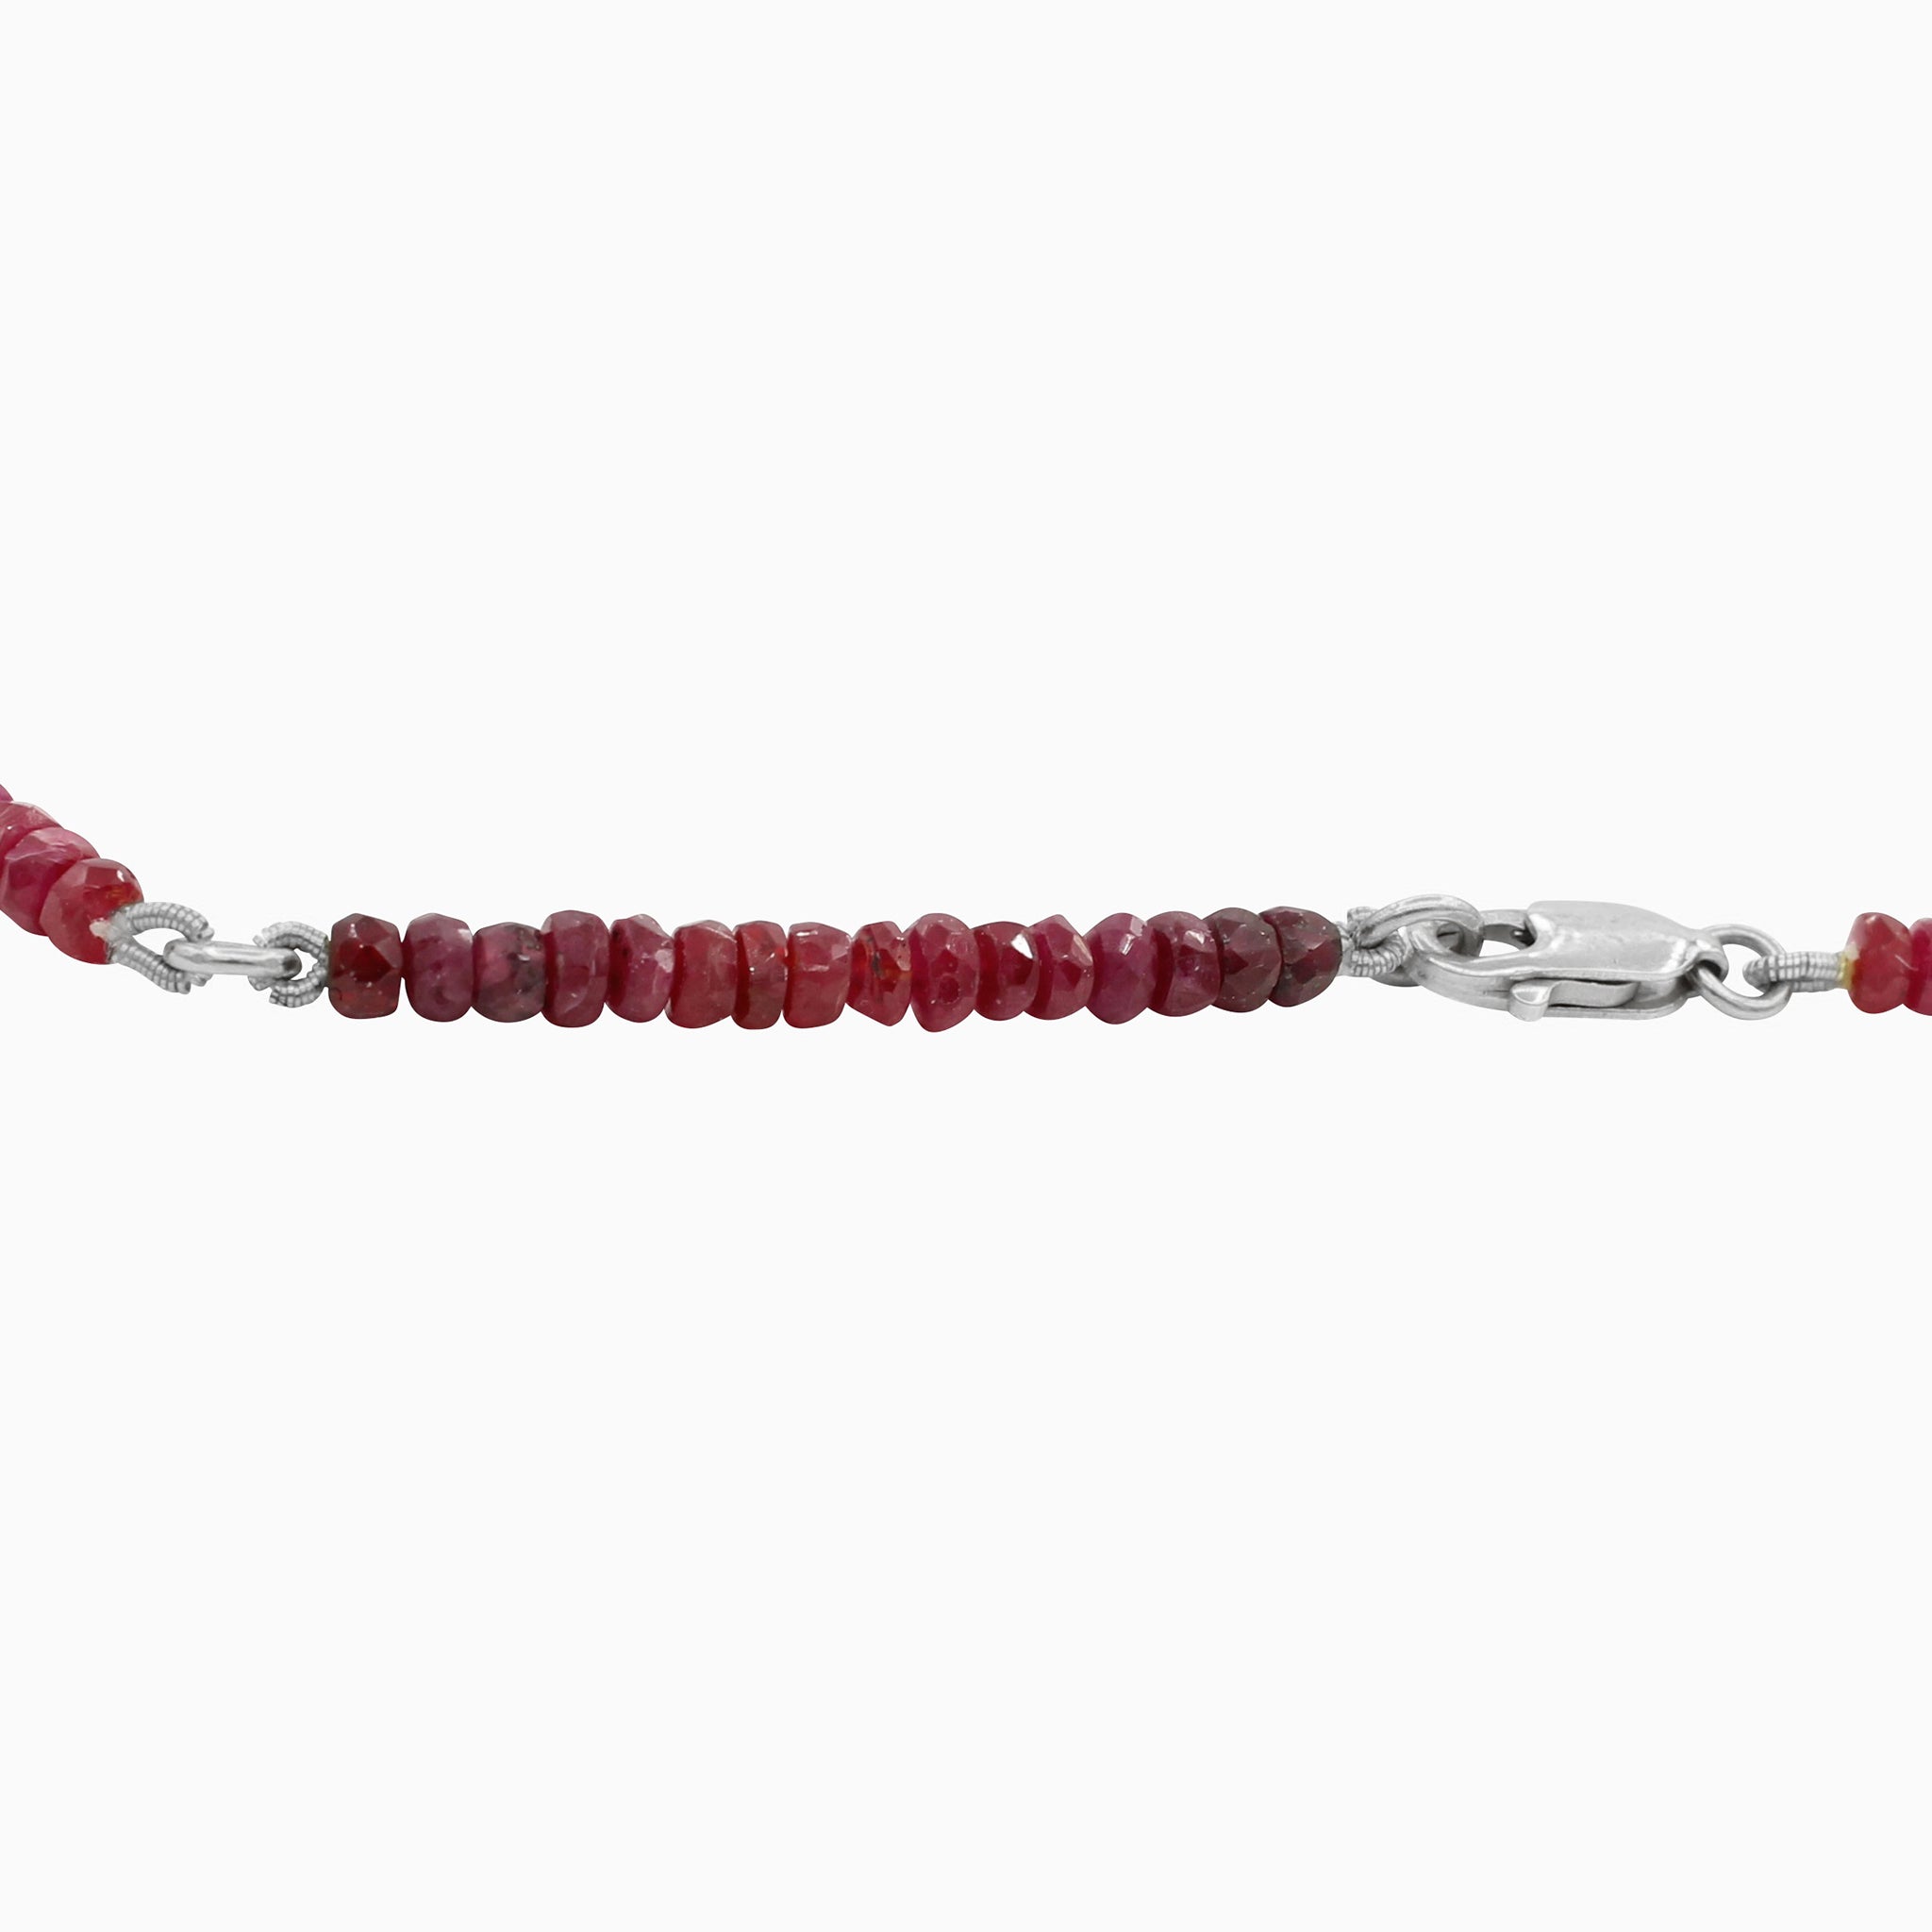 Radiant in Red 40CT Adjustable Ombre Ruby Choker Necklace, 14k White Gold Lobster Clasp Closure